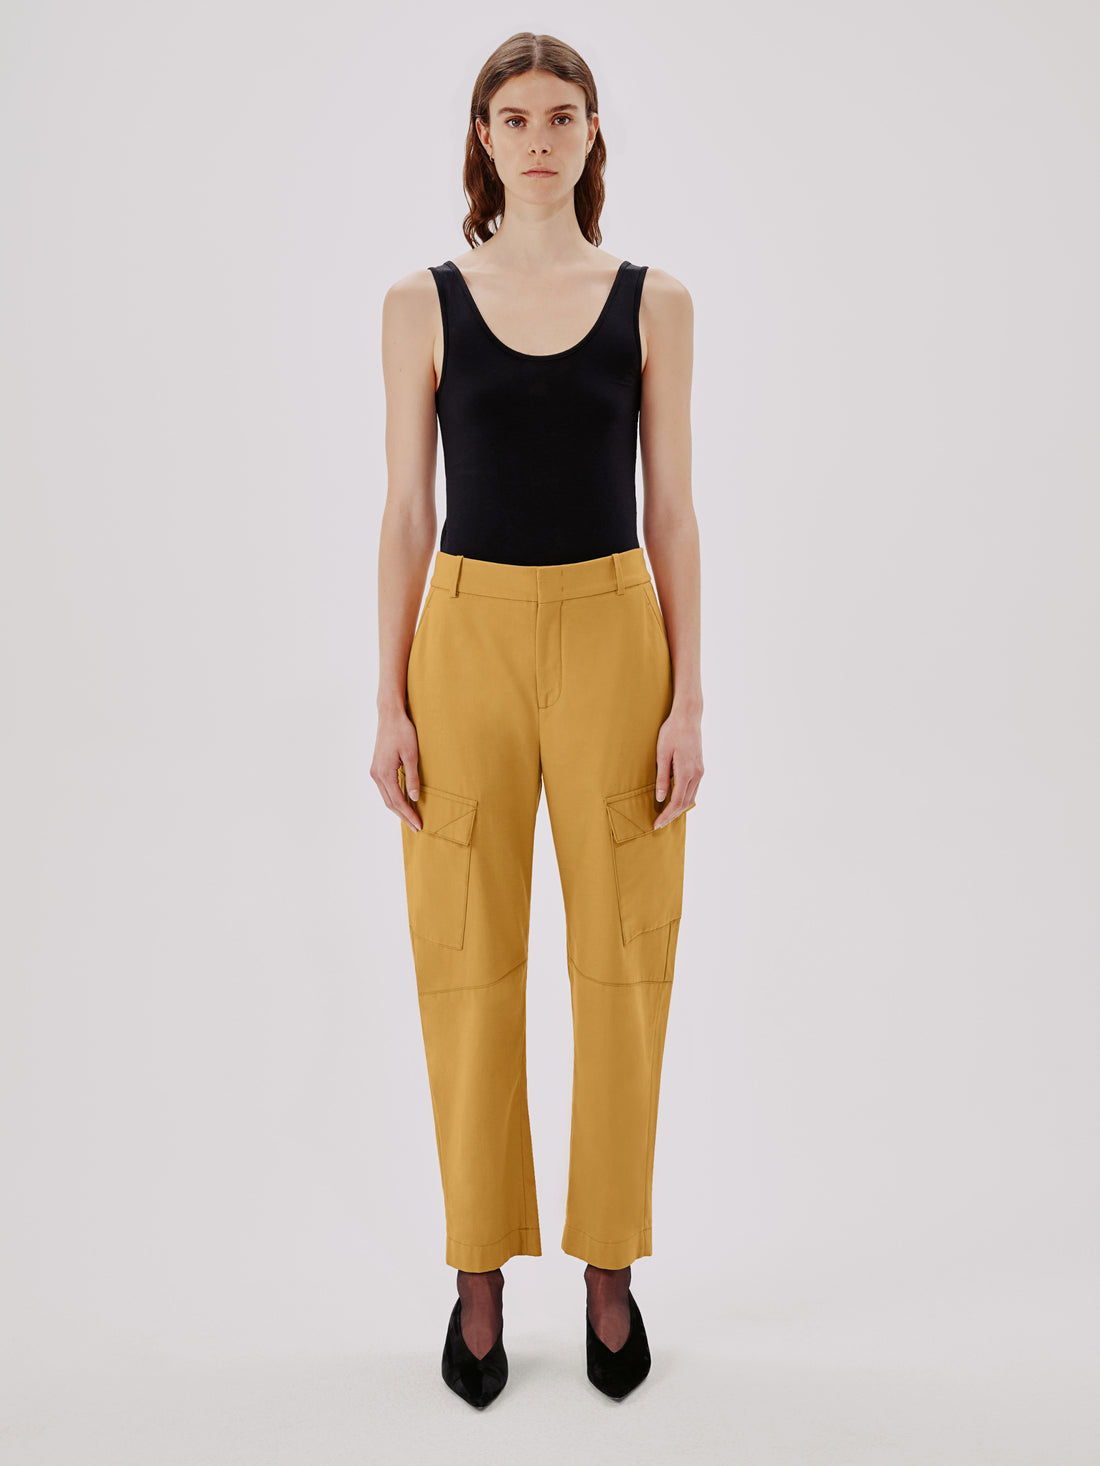 Zara Cargo Pants for Women on sale - Best Prices in Philippines